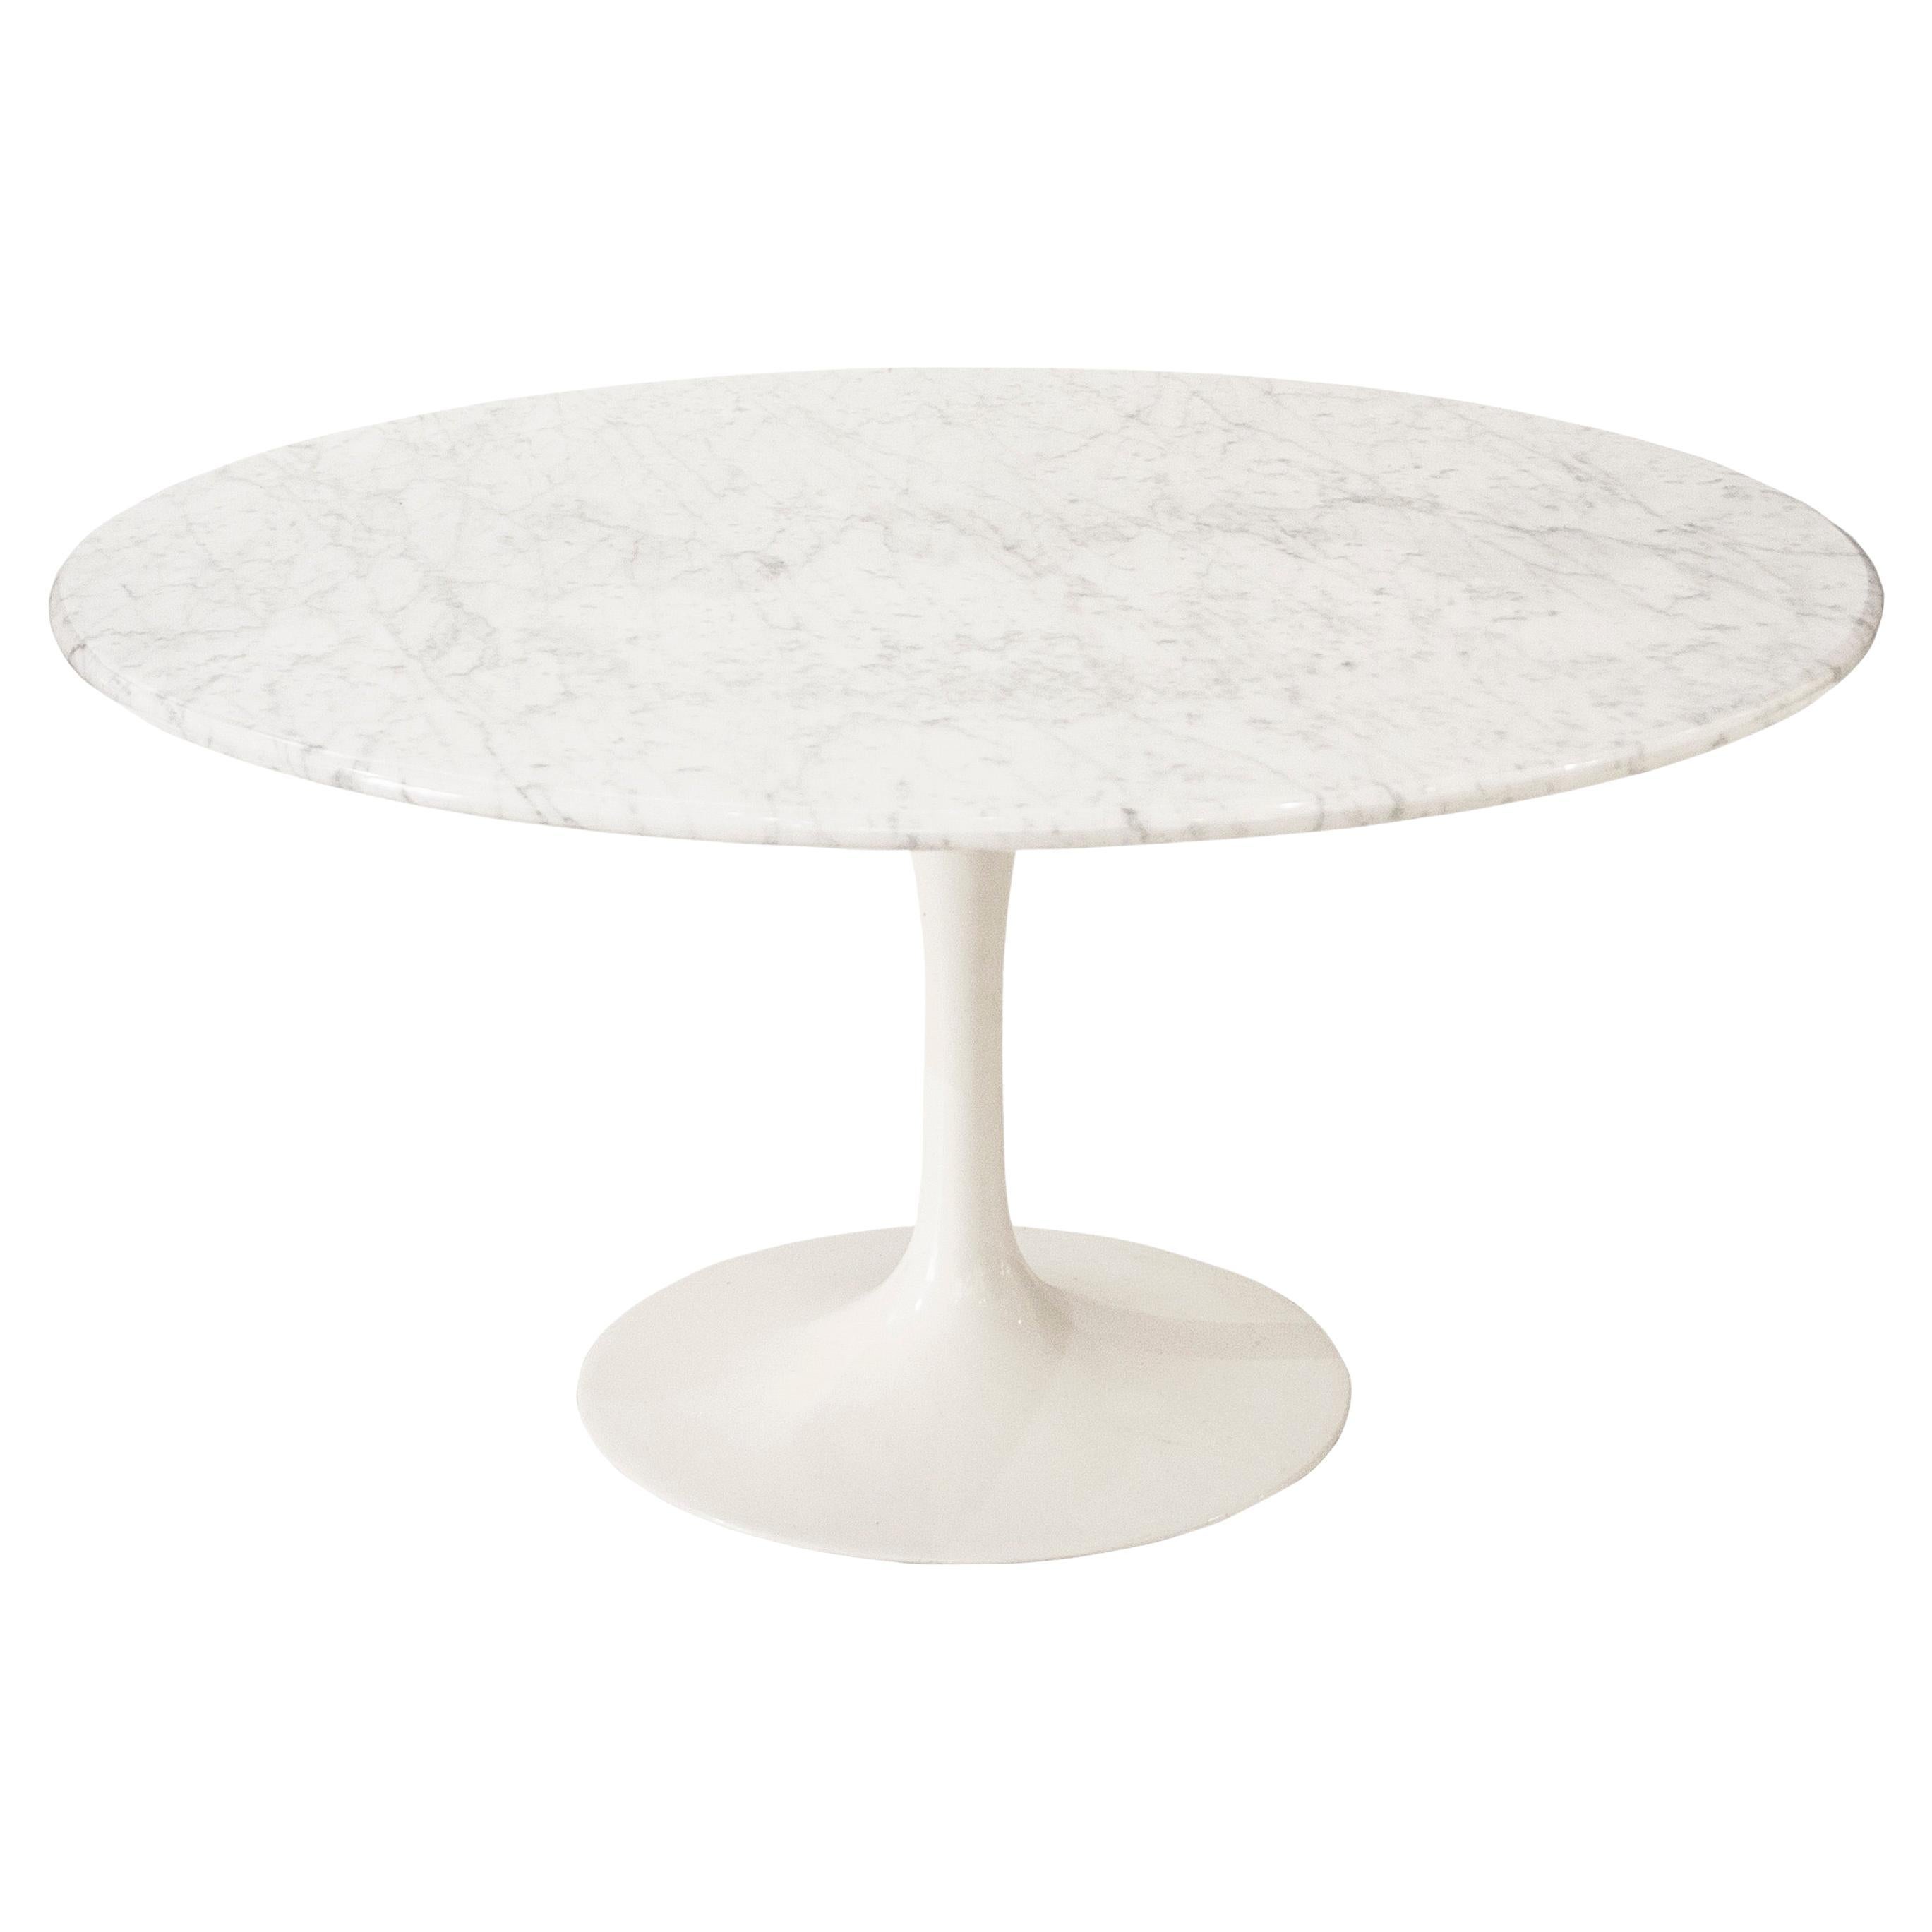 Mini Tulip Table, Designed by Eero Saarinen and Edited by Knoll, USA, 1956 For Sale